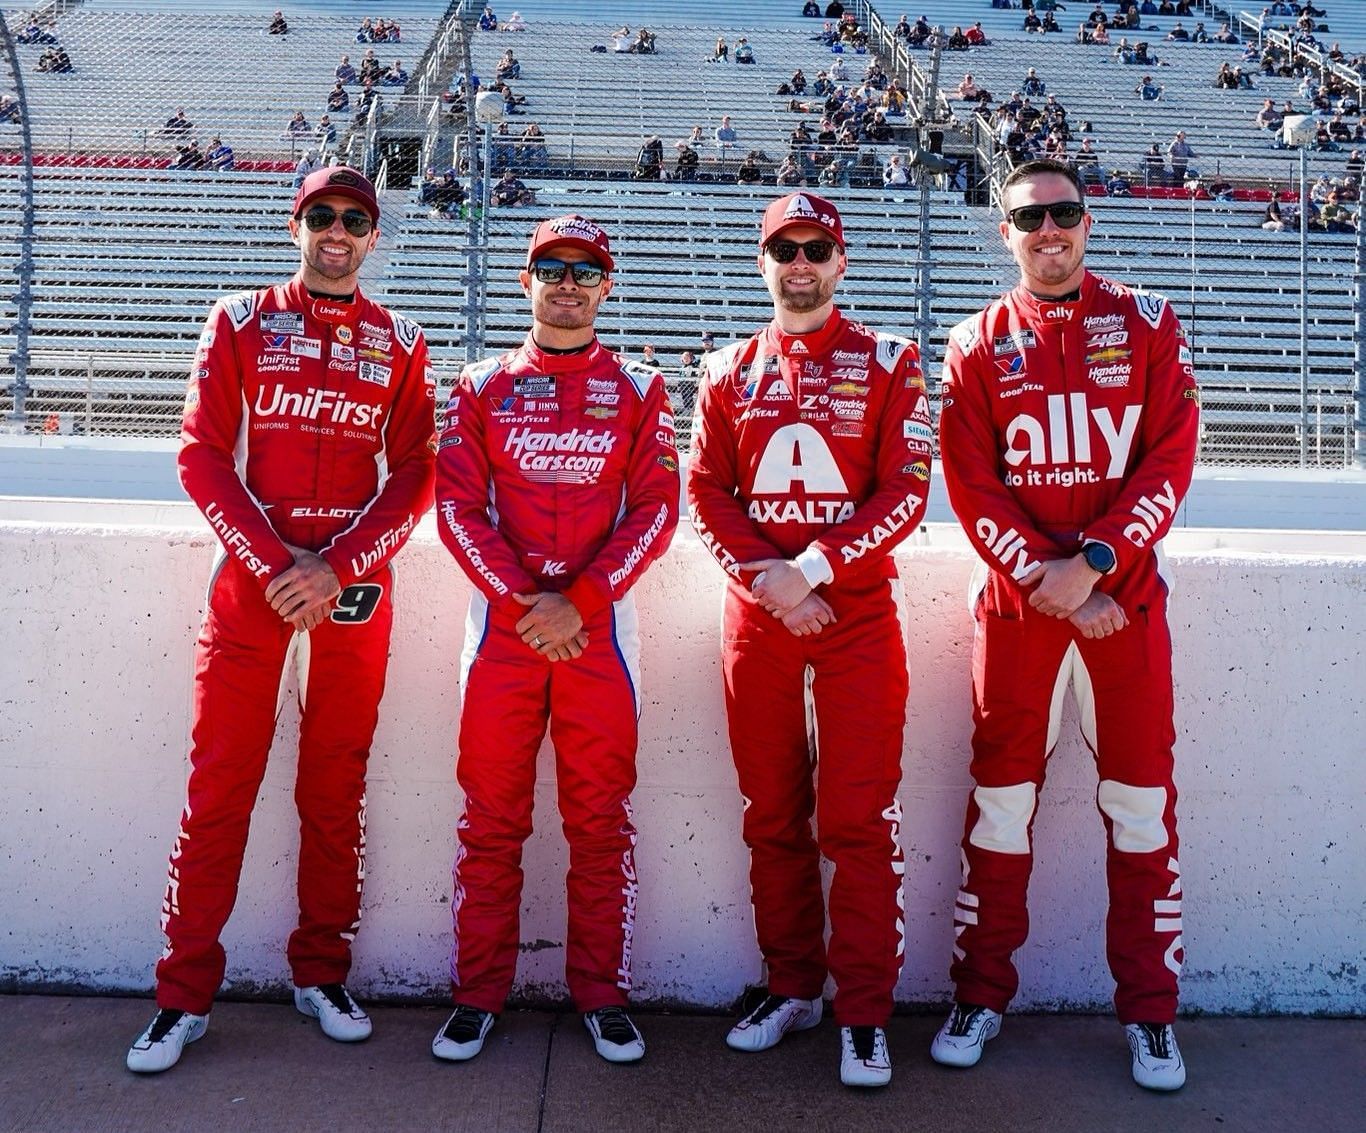 (L-R) NASCAR Cup Series drivers Chase Elliott, Kyle Larson, William Byron and Alex Bowman ahead of Hendrick Motorsports